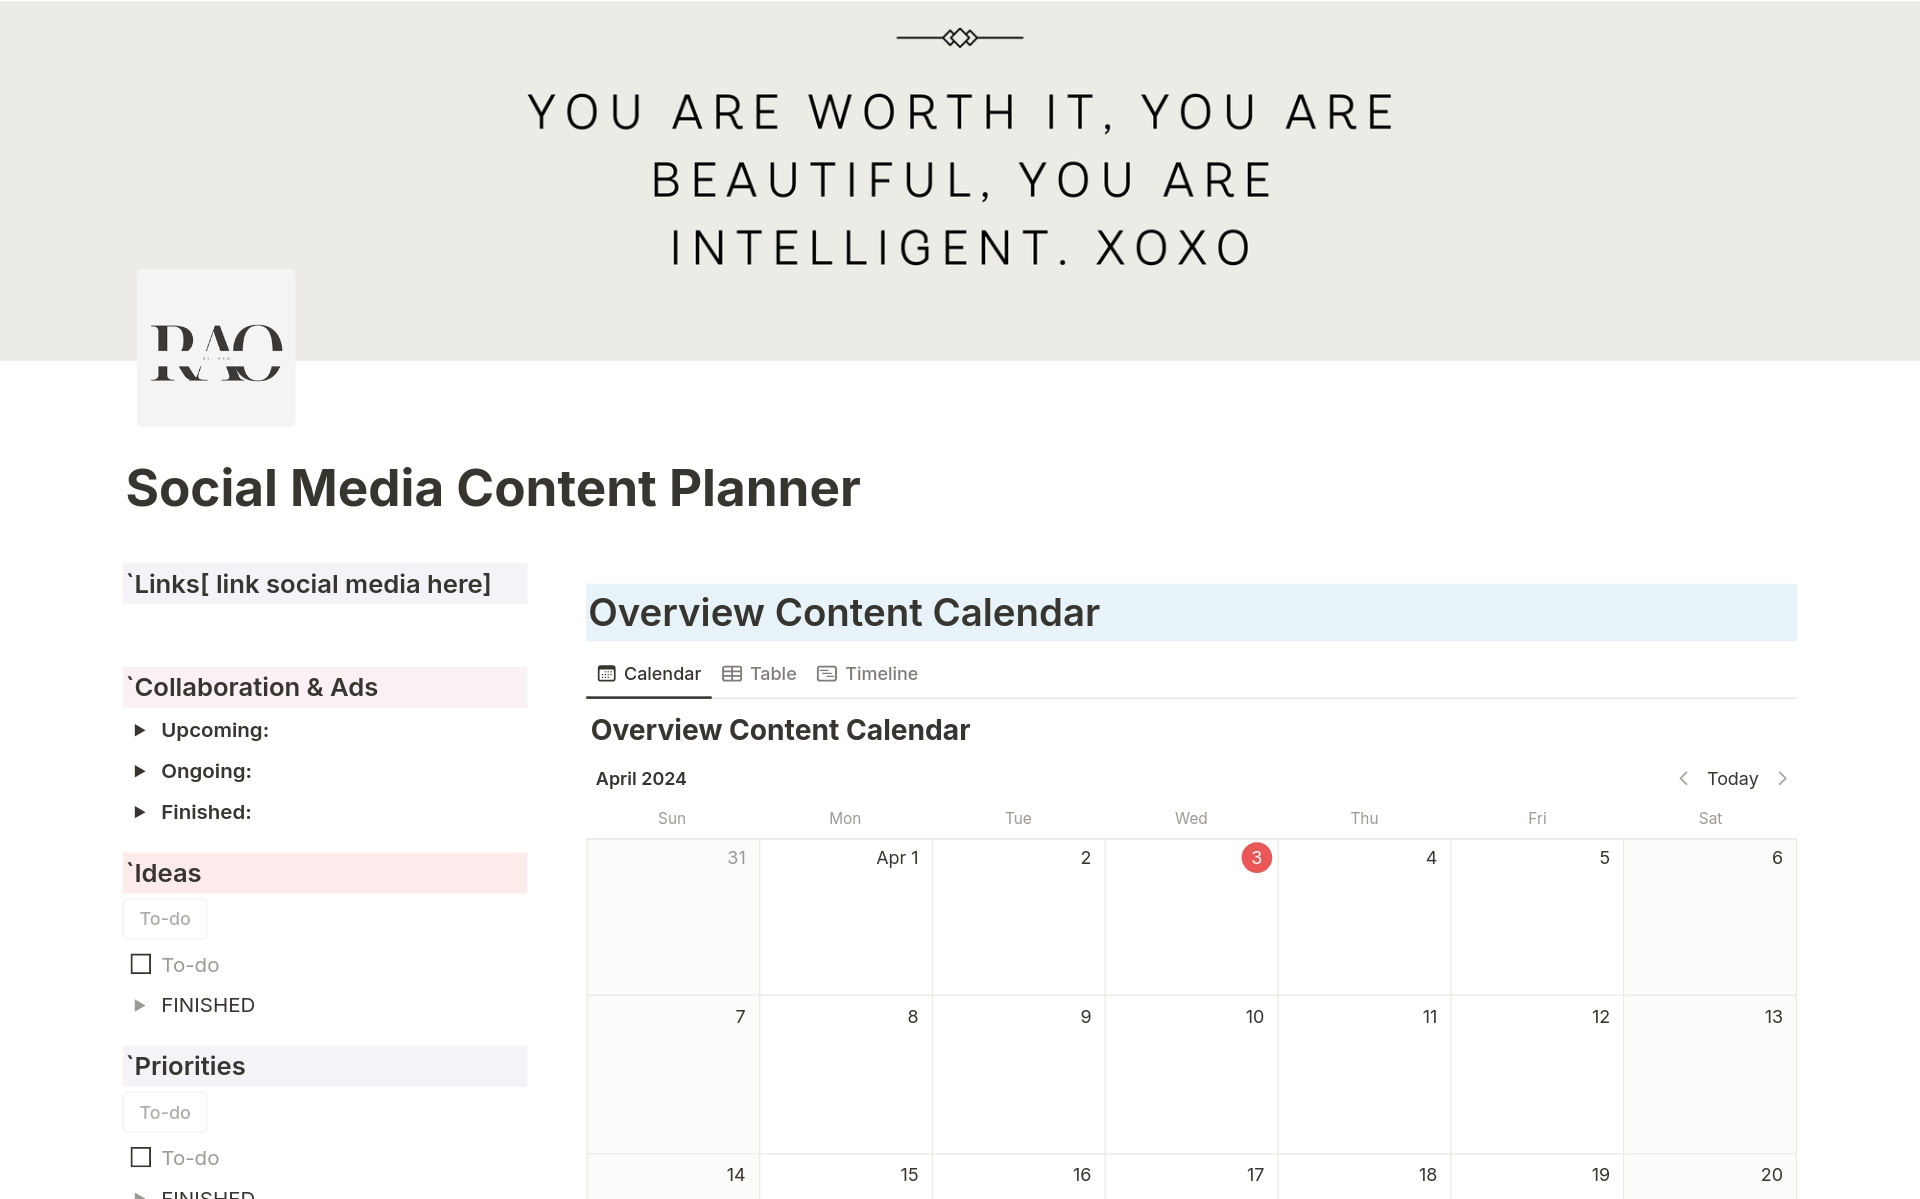 With RAOS's new Social Media Content Planner Notion Template, tracking, producing, and selling content will be ten times easier.